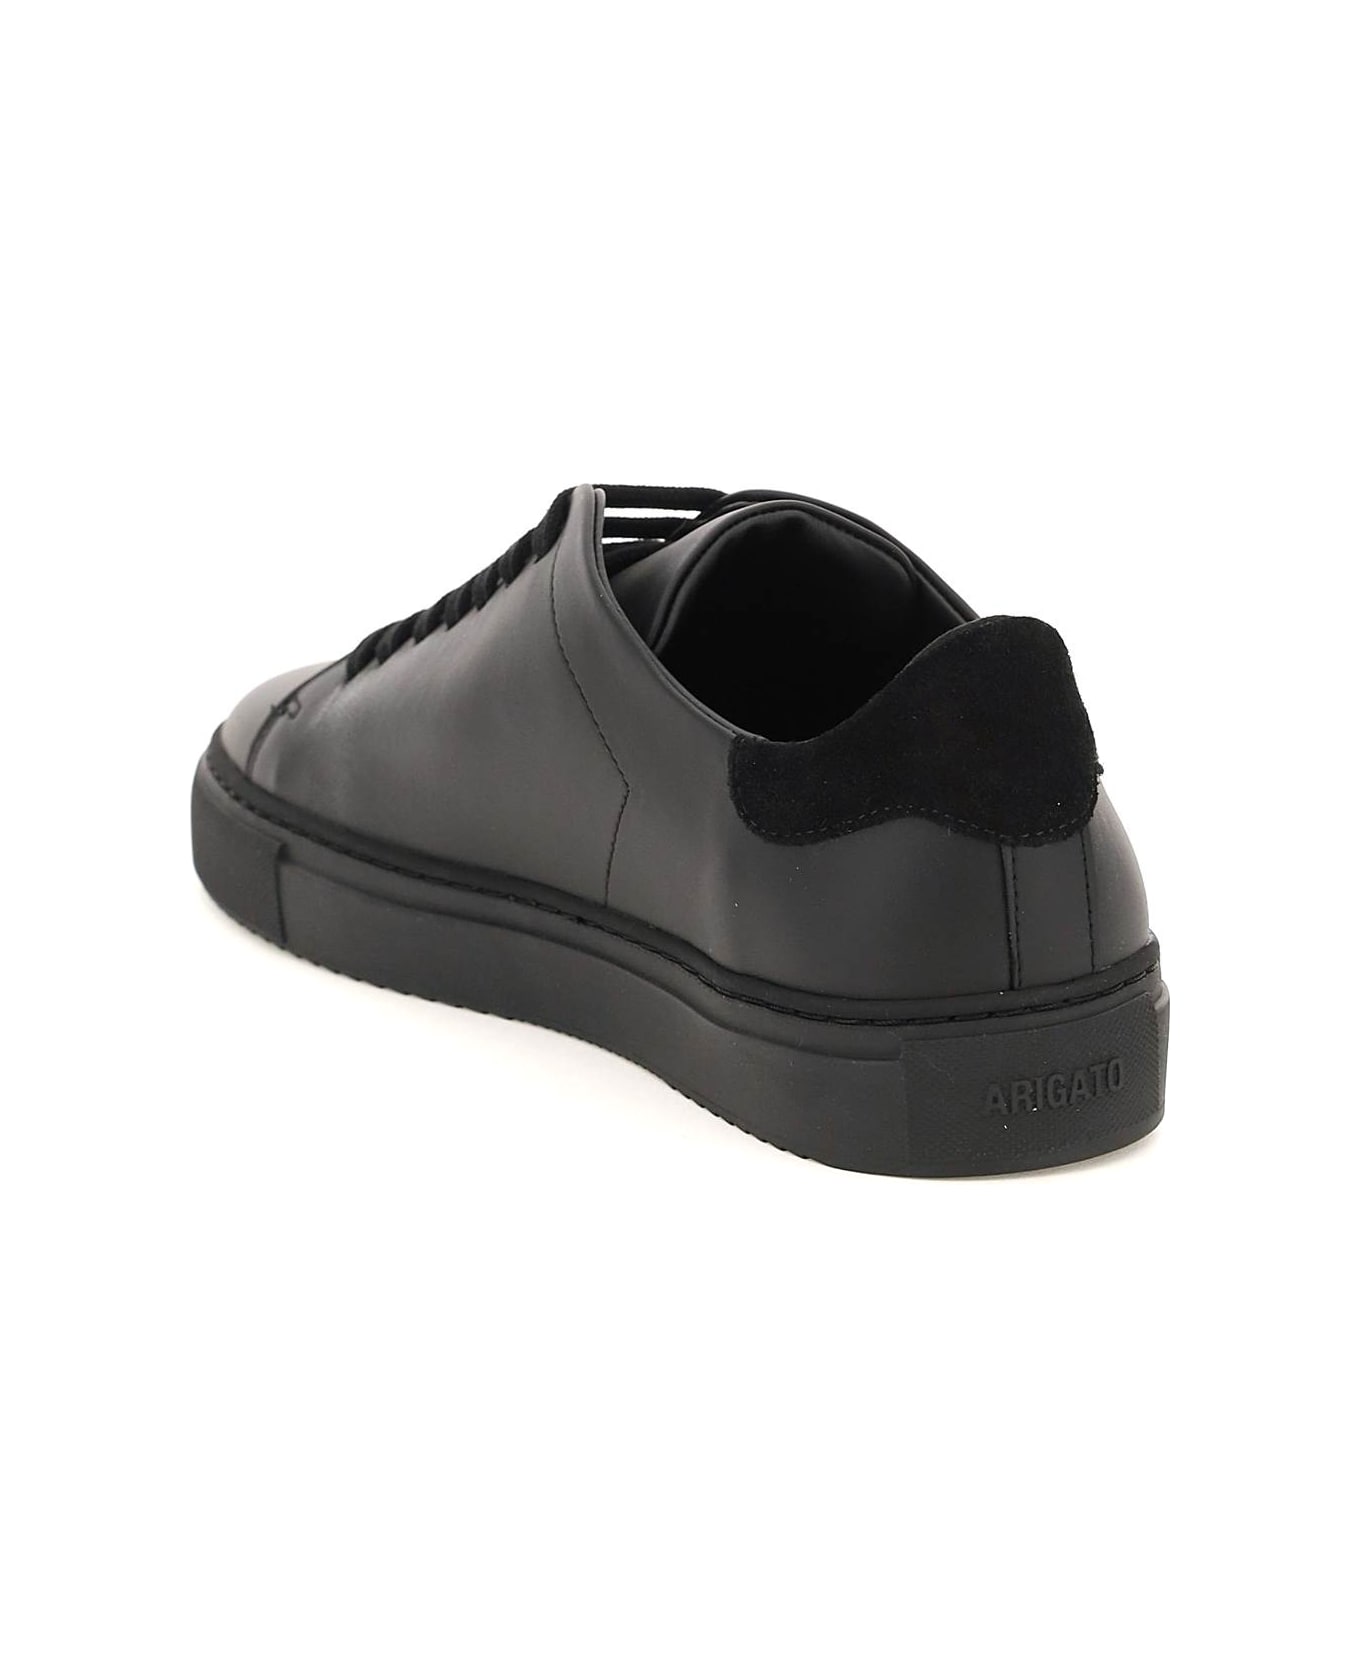 Axel Arigato Clean 90 Leather Sneakers - Nero スニーカー